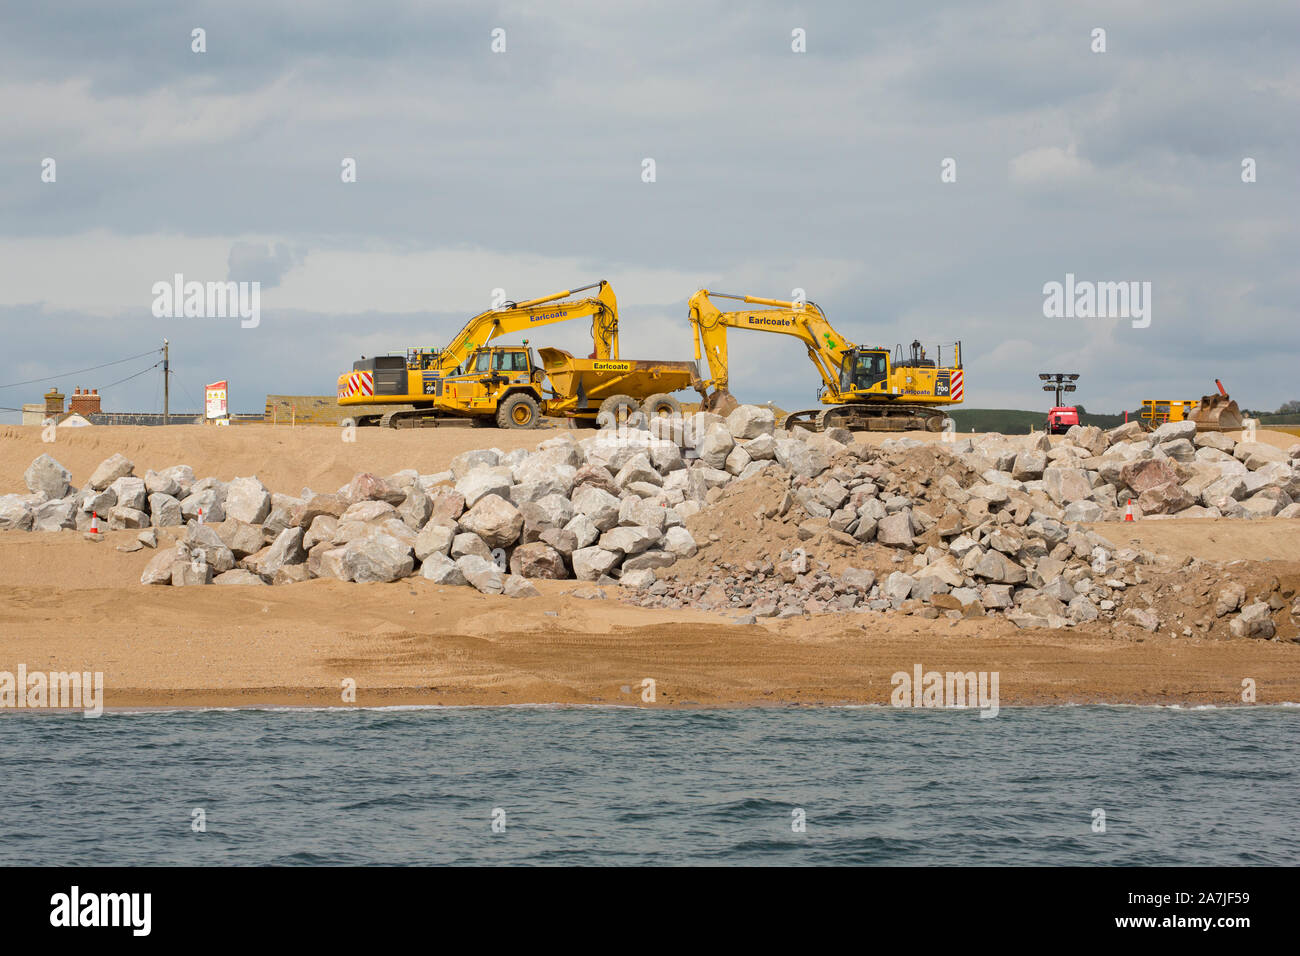 Work being carried out on the beach at West Bay in 2019 to protect it from storms following flooding in the storms of 2014. Dorset England UK GB Stock Photo